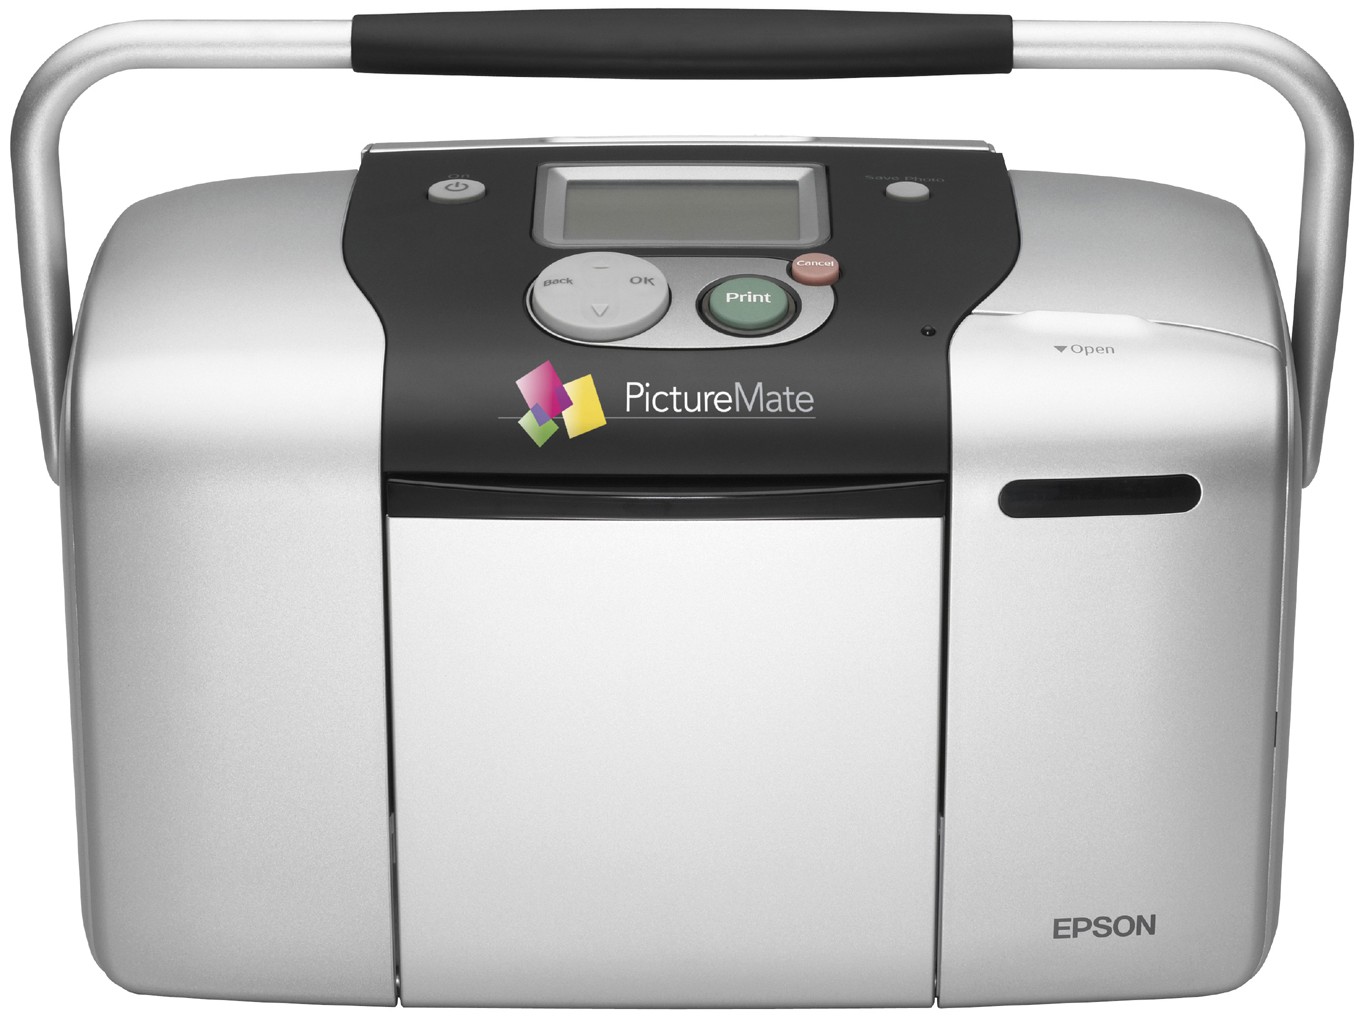 Driver Epson Picturemate Linux How to Download and Install - Featured